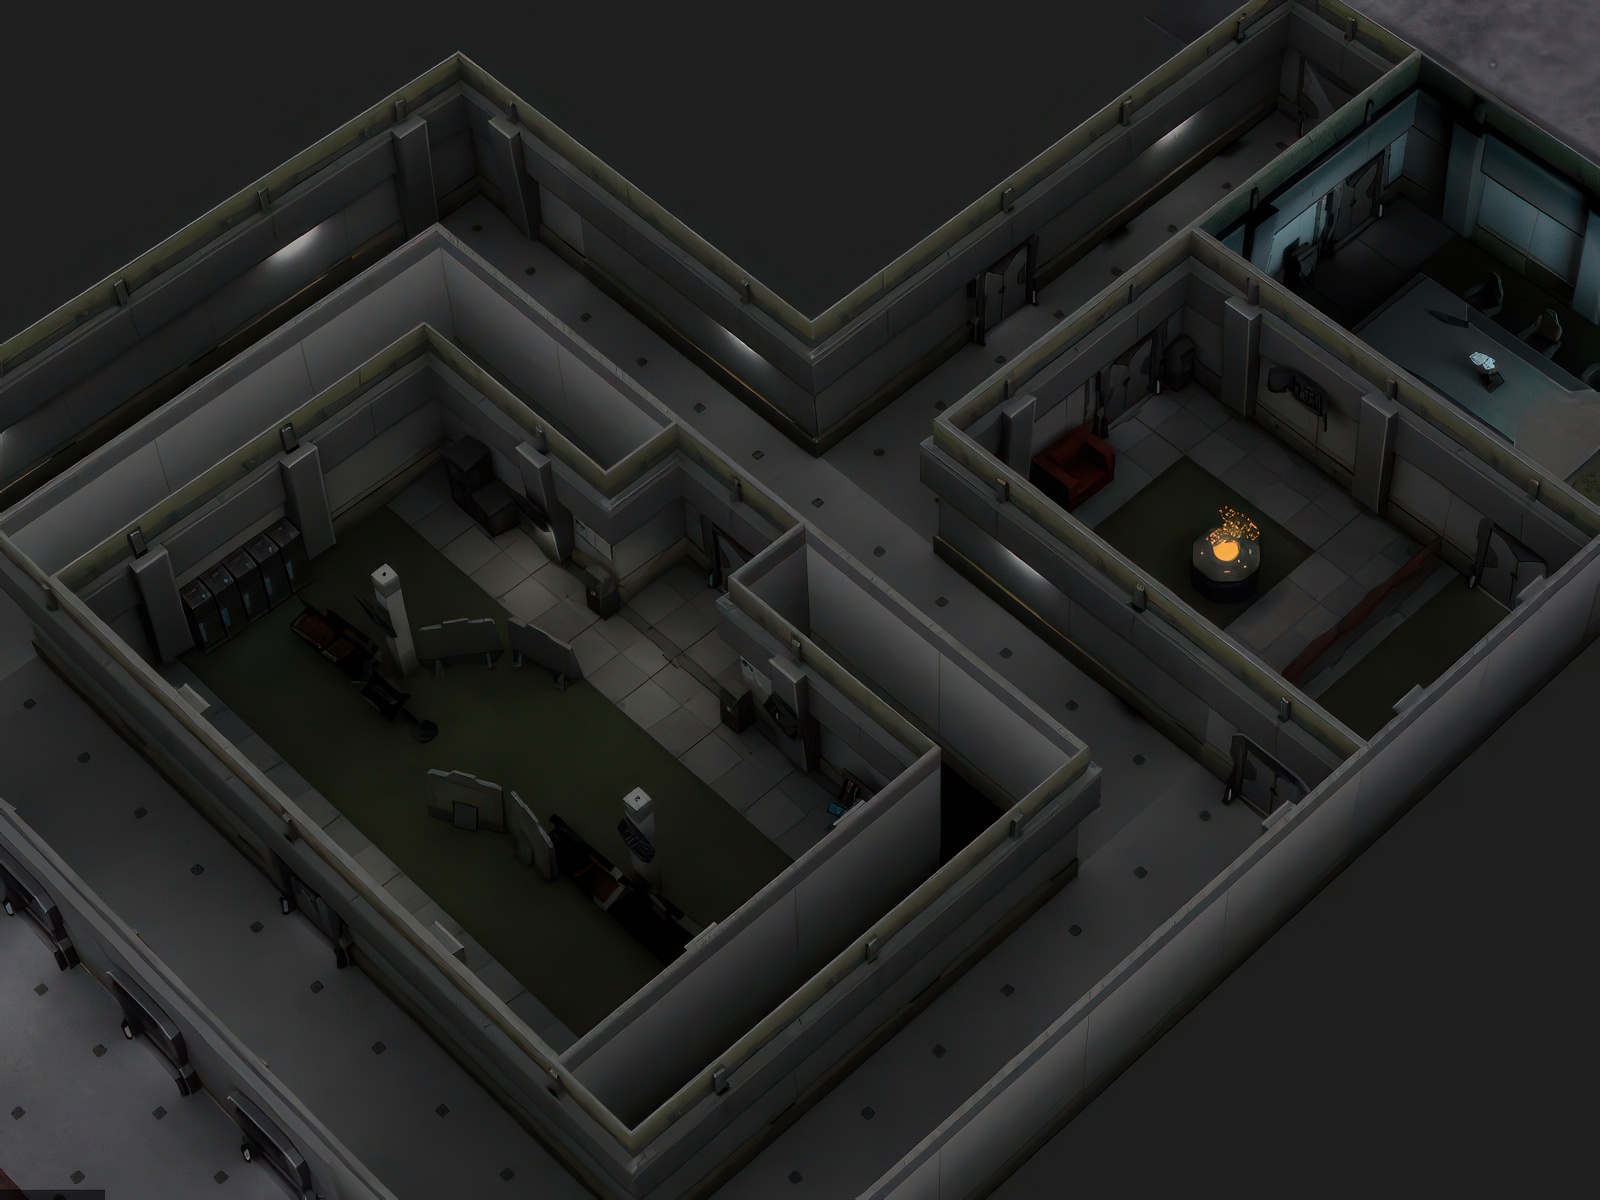 Work in progress with rooms being laid out in the editor